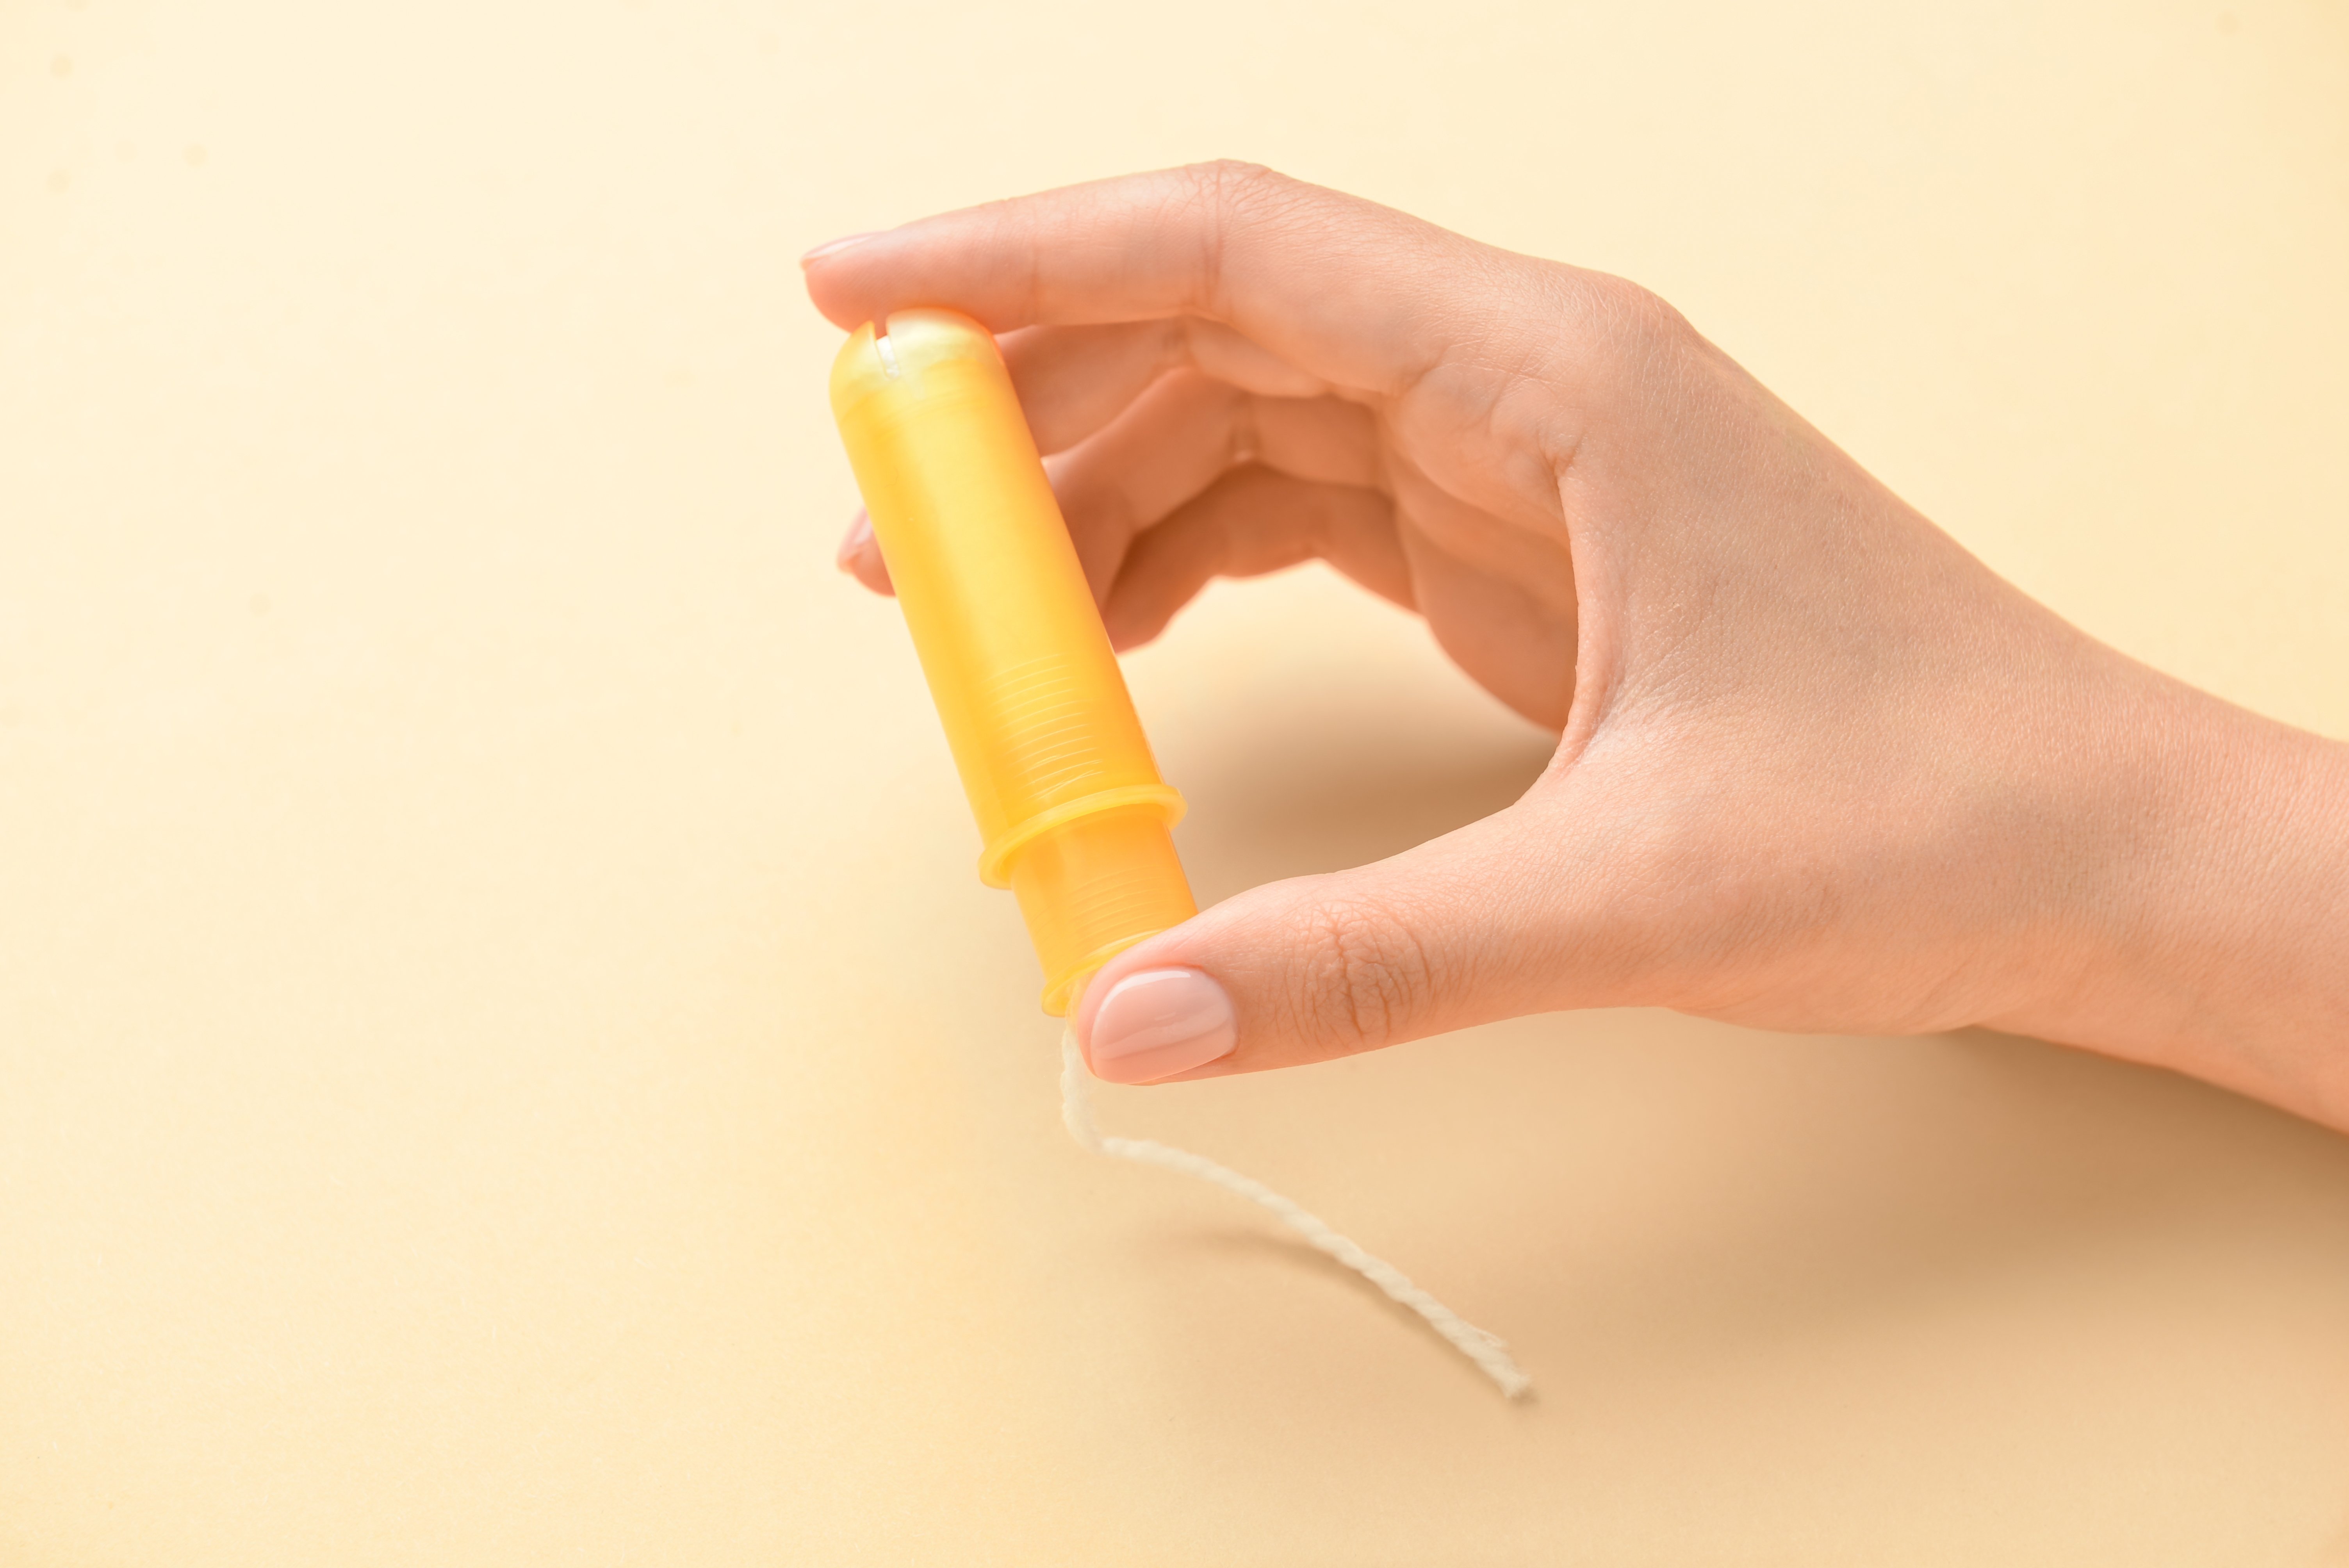 A woman showing a piece of sanitary tampon with yellow plastic applicator. | Source: Shutterstock